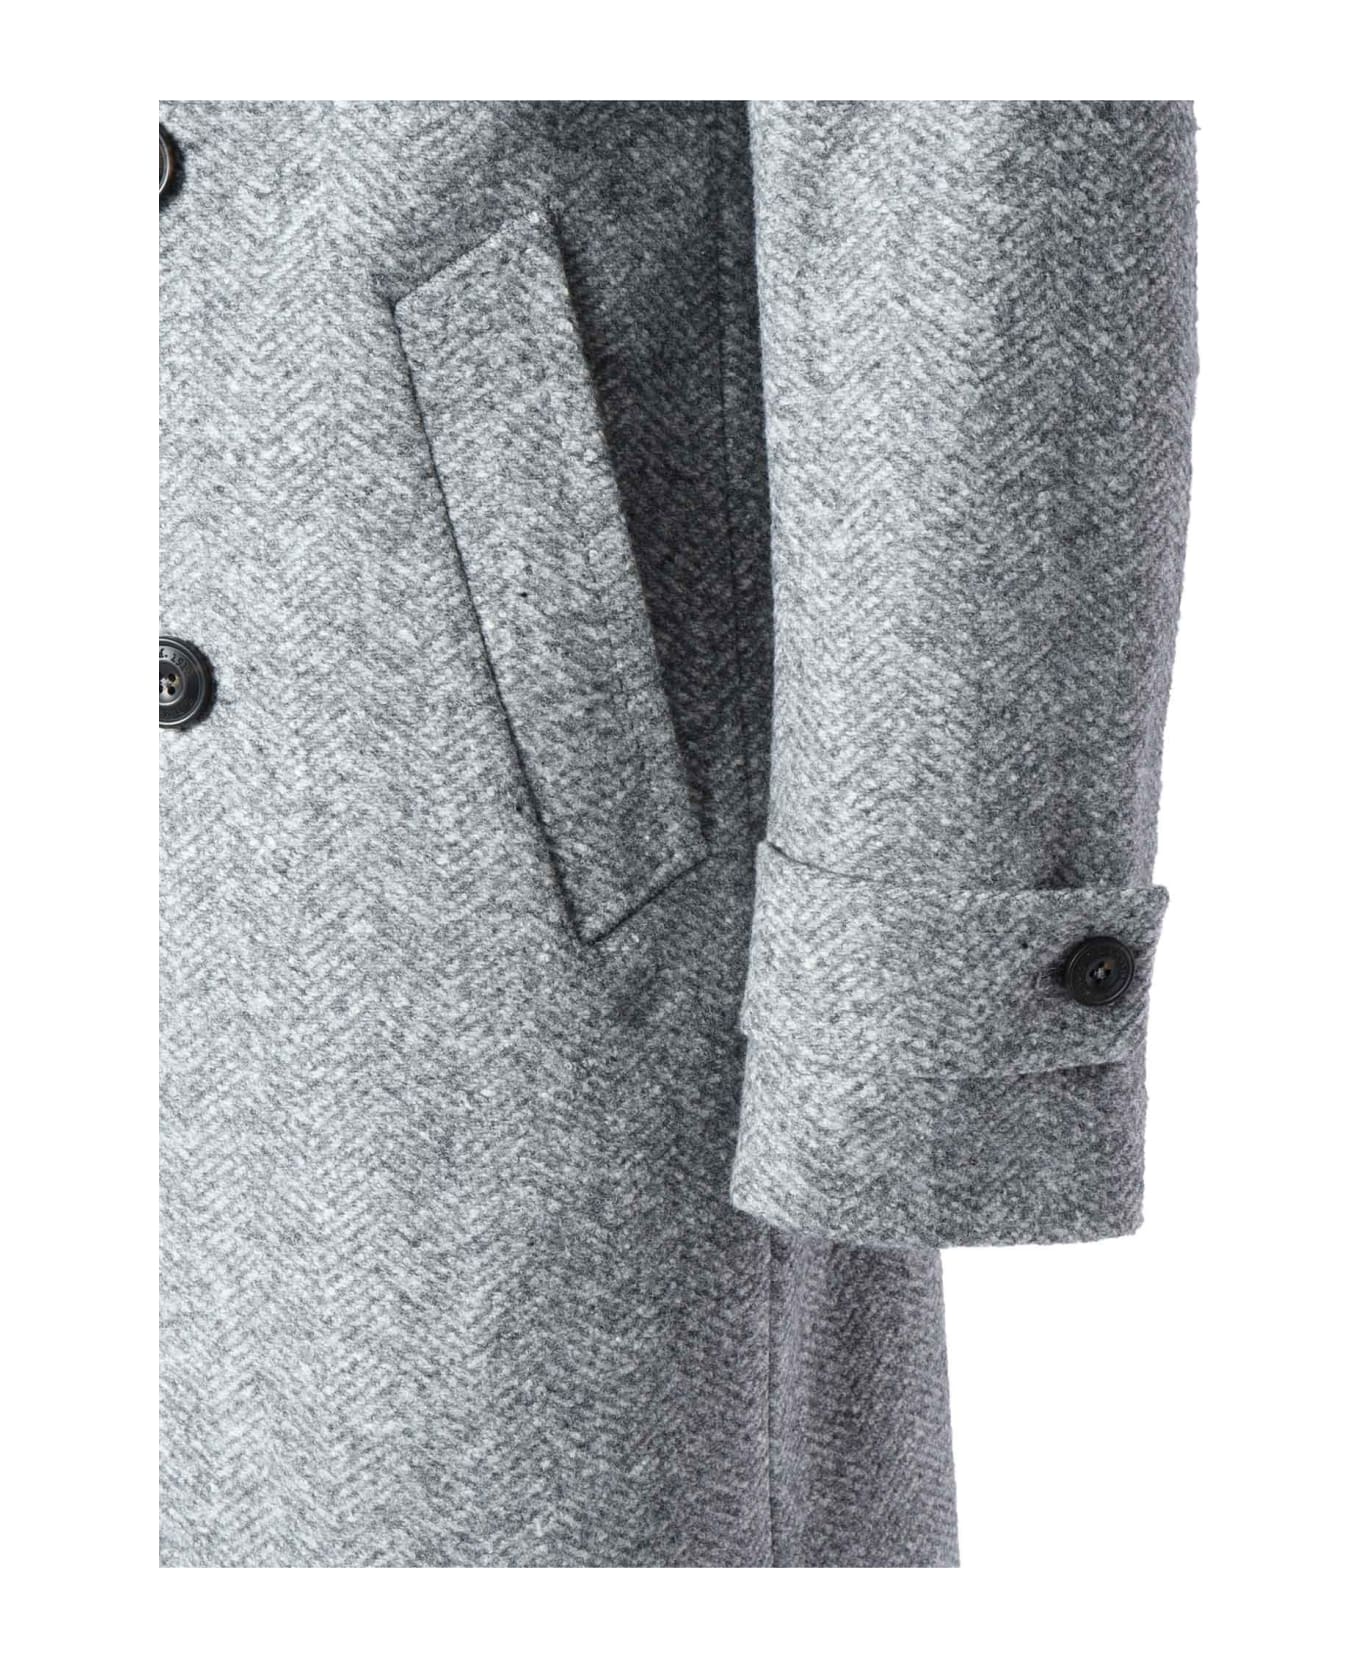 L.B.M. 1911 Double-breasted Coat - GREY